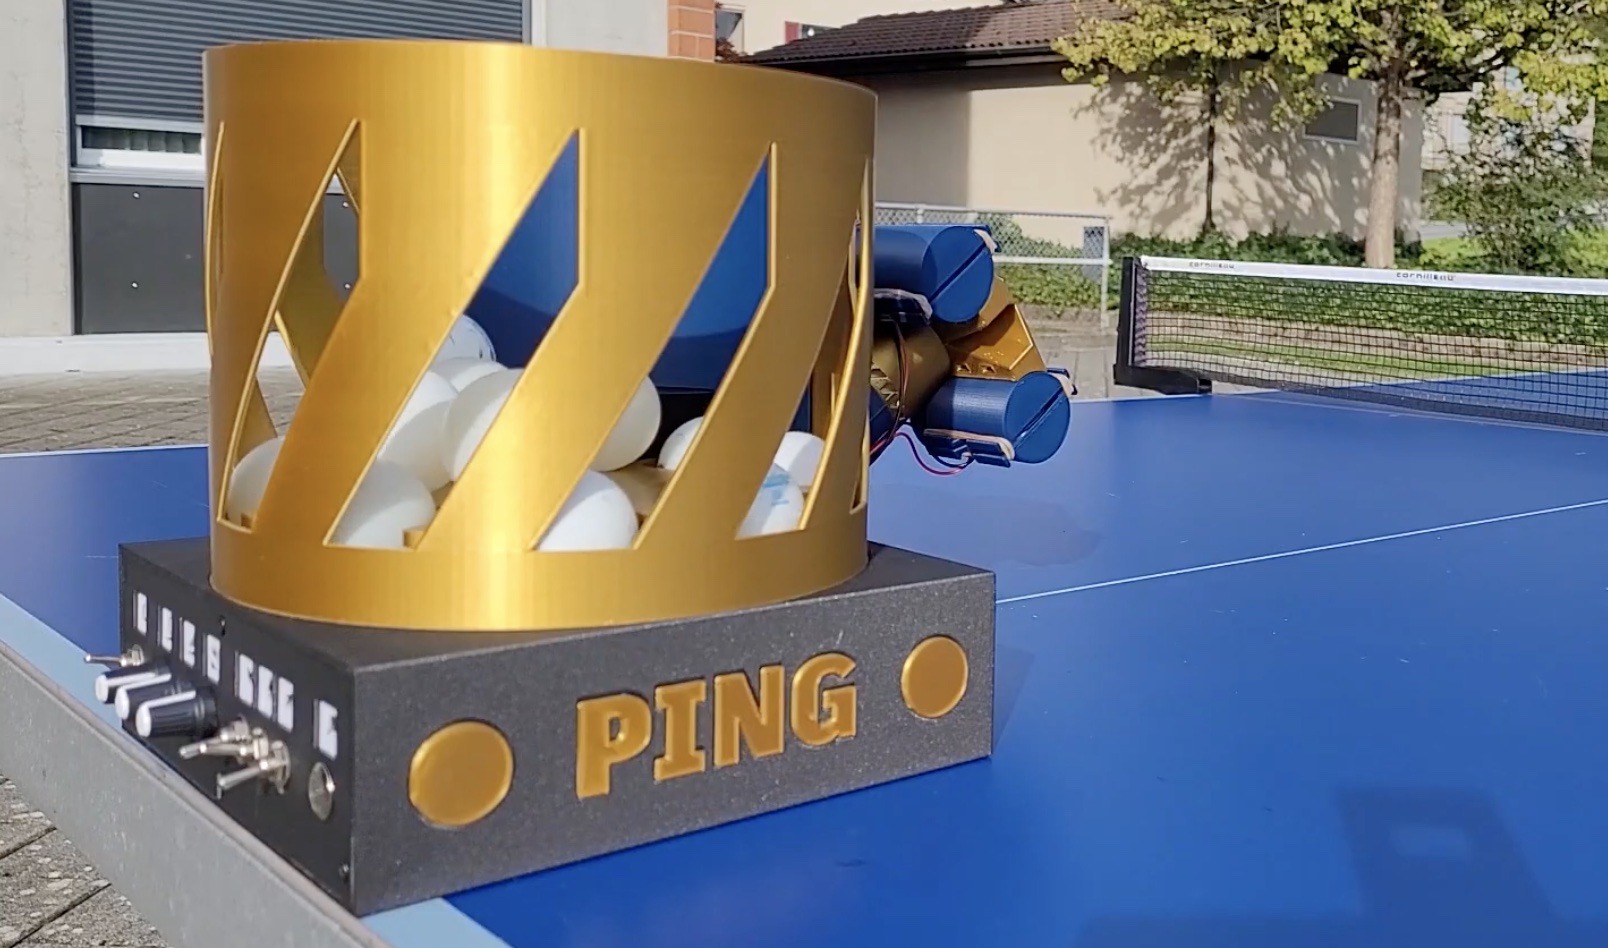 The ping pong robot allows you to compose the services